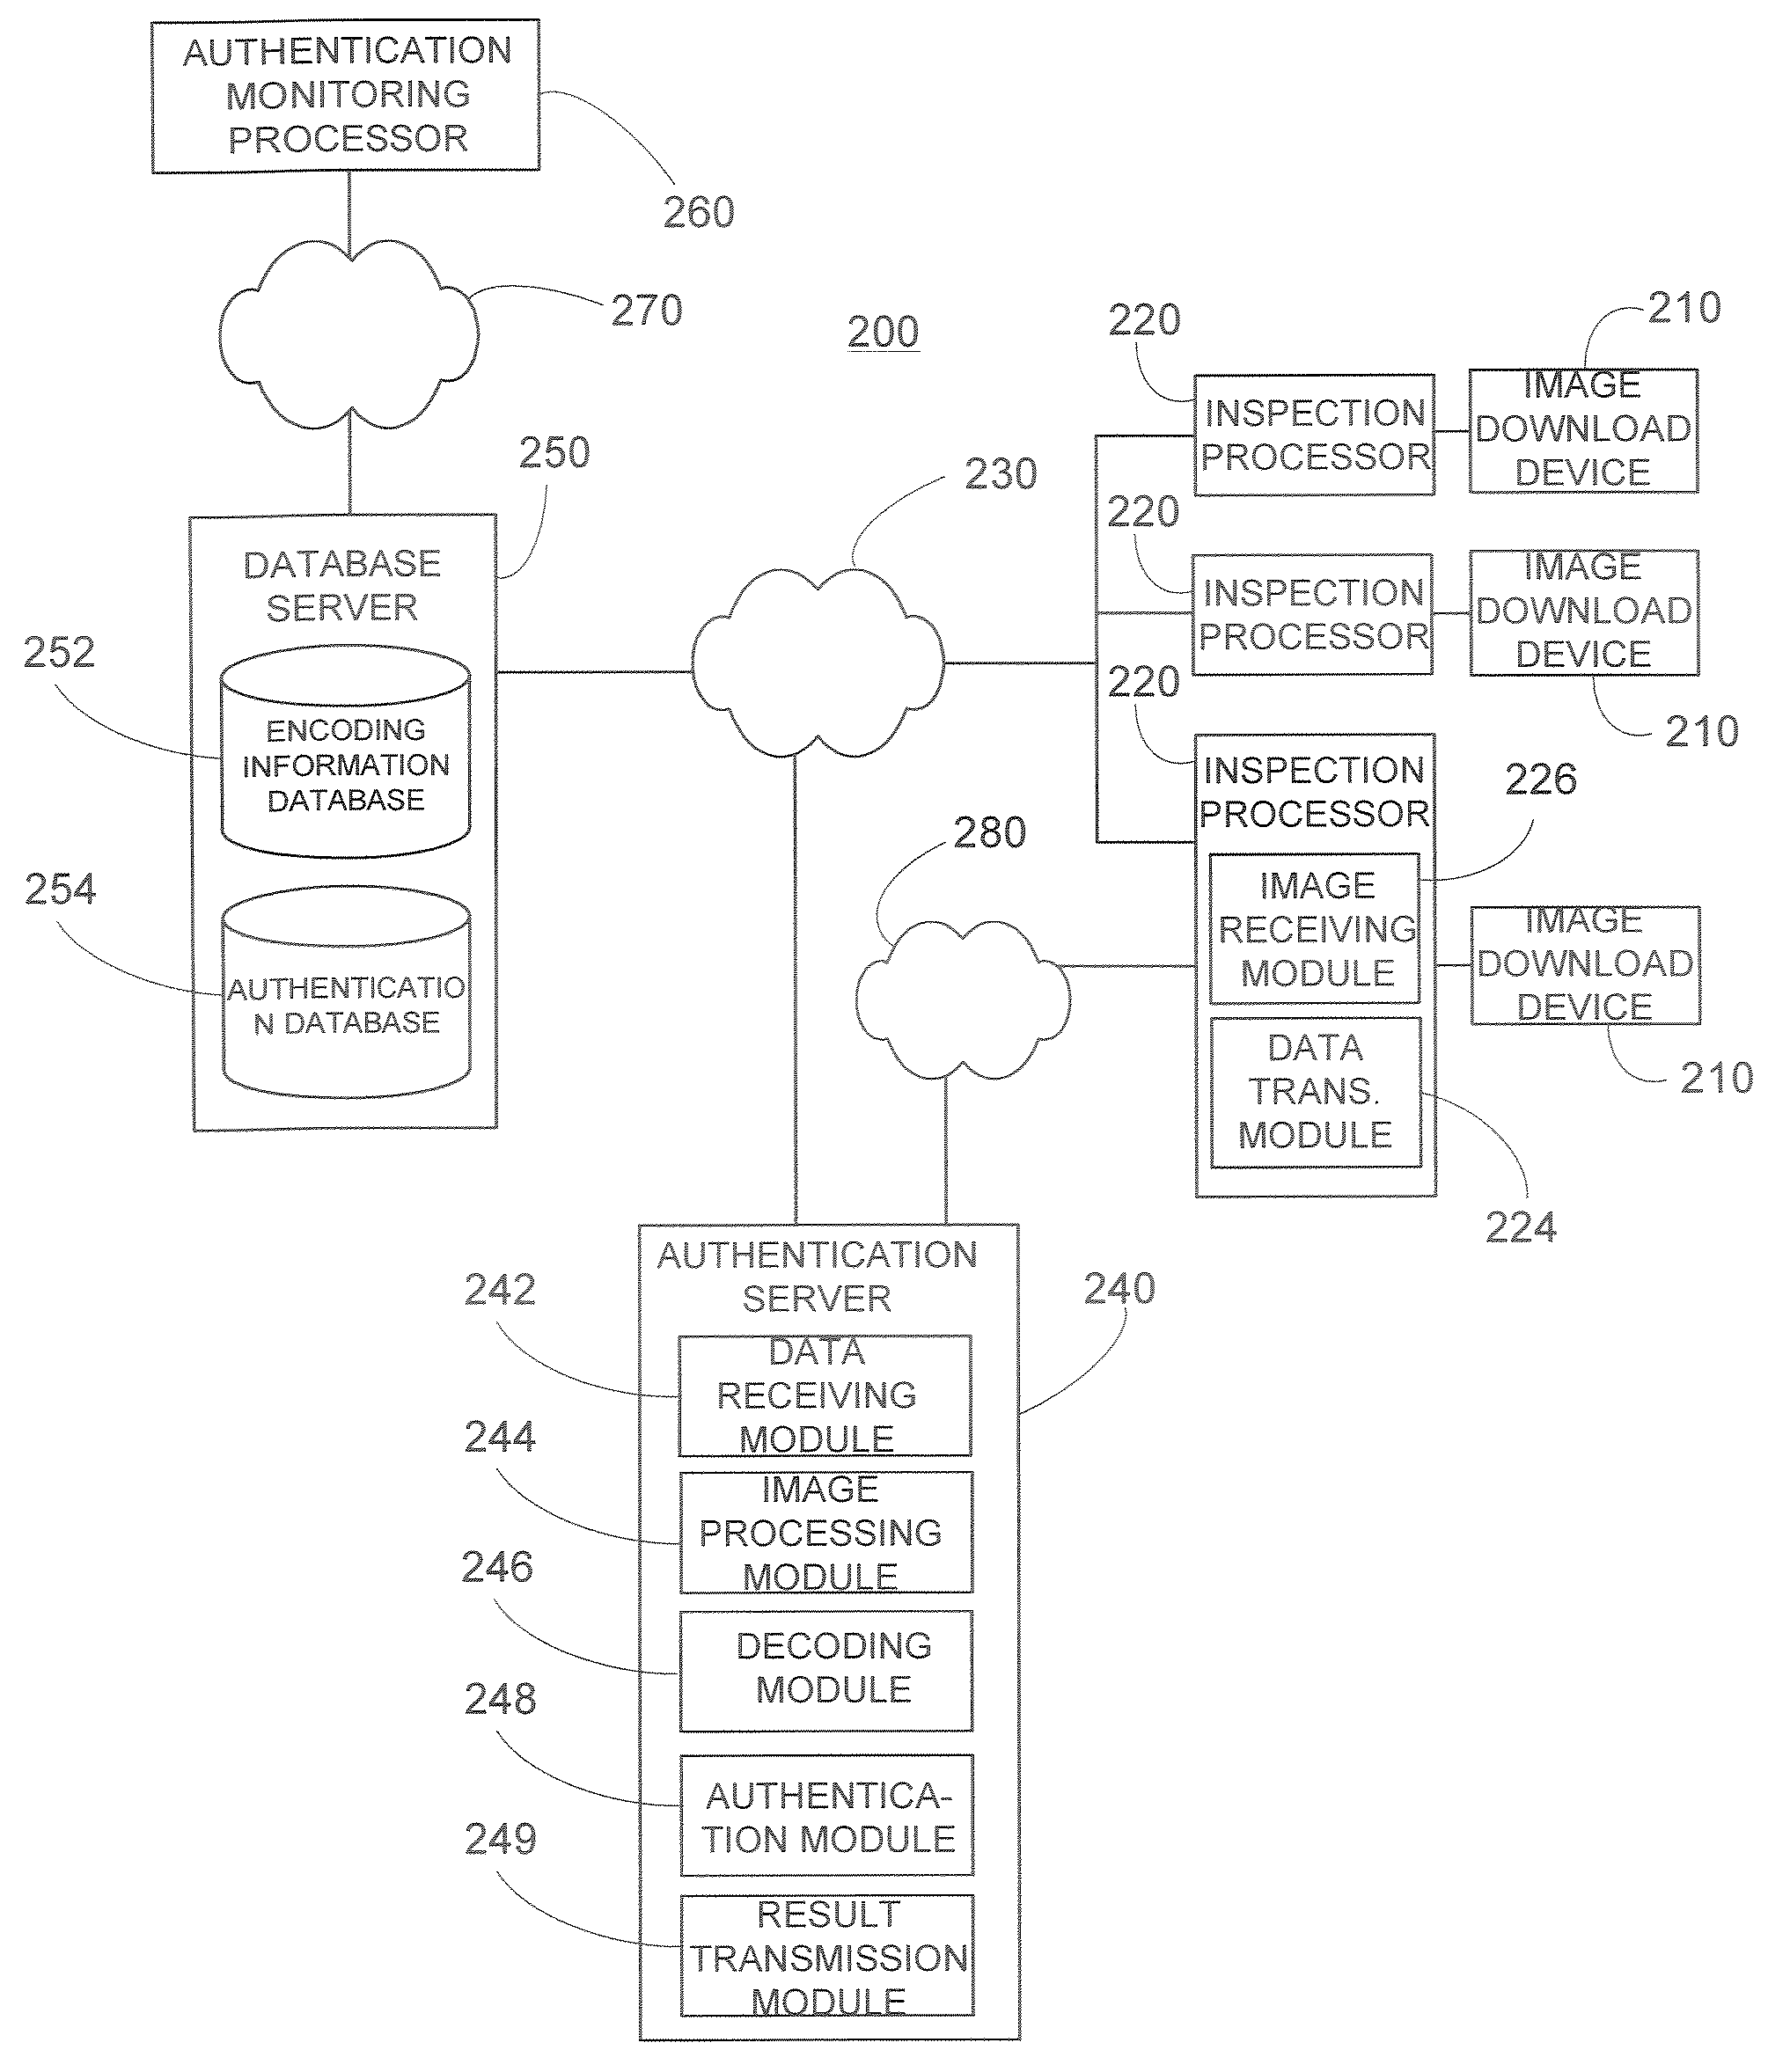 Object Authentication Using Encoded Images Digitally Stored on the Object